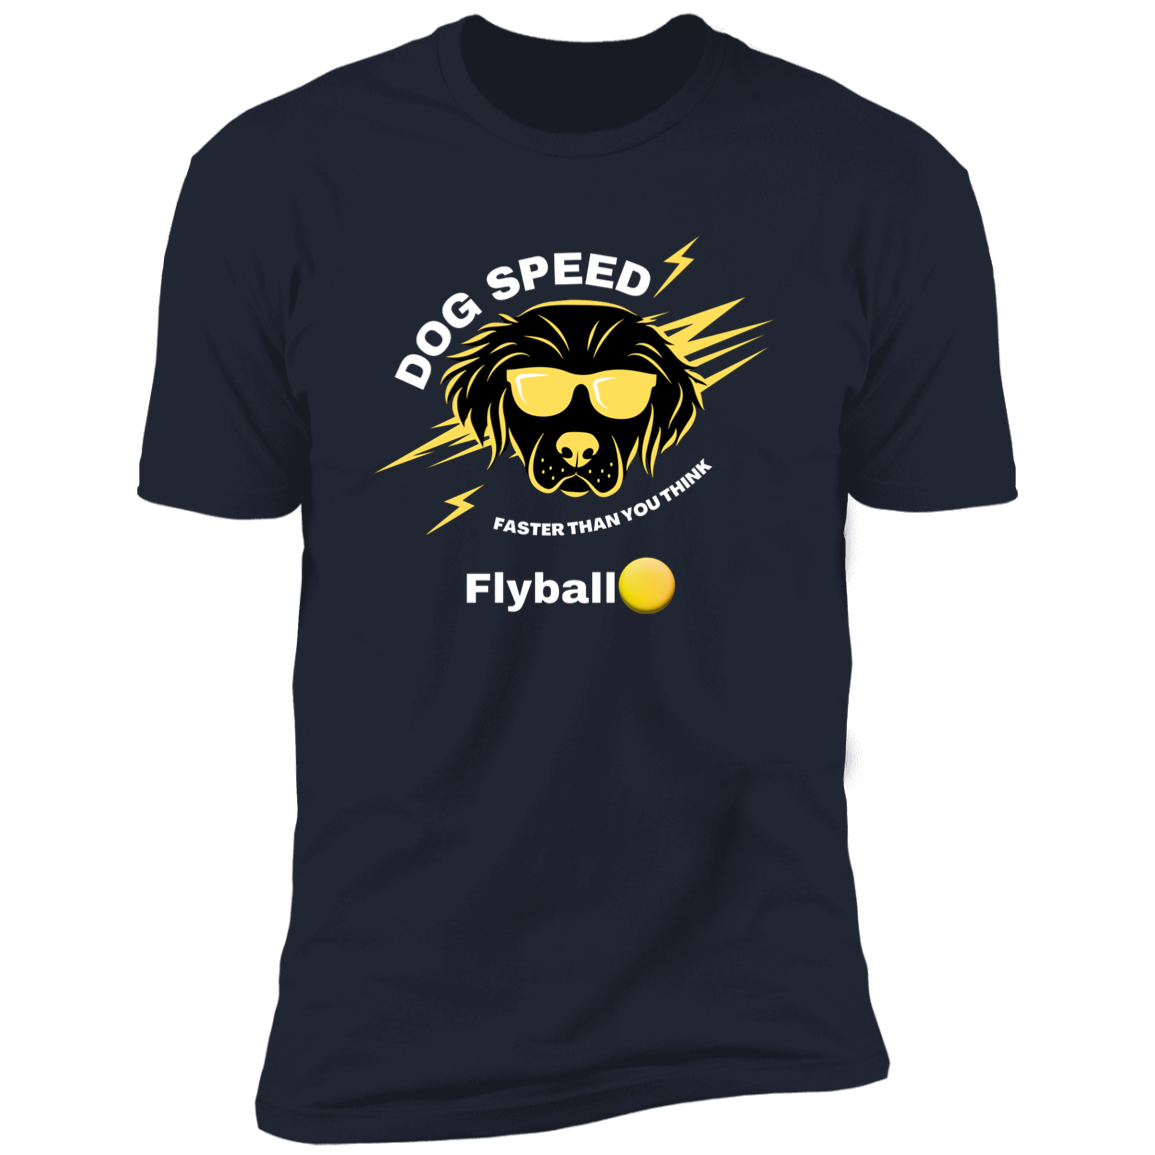 Dog Speed Faster Than You Think Flyball T-shirt, Flyball shirt dog shirt for humans, in navy blue